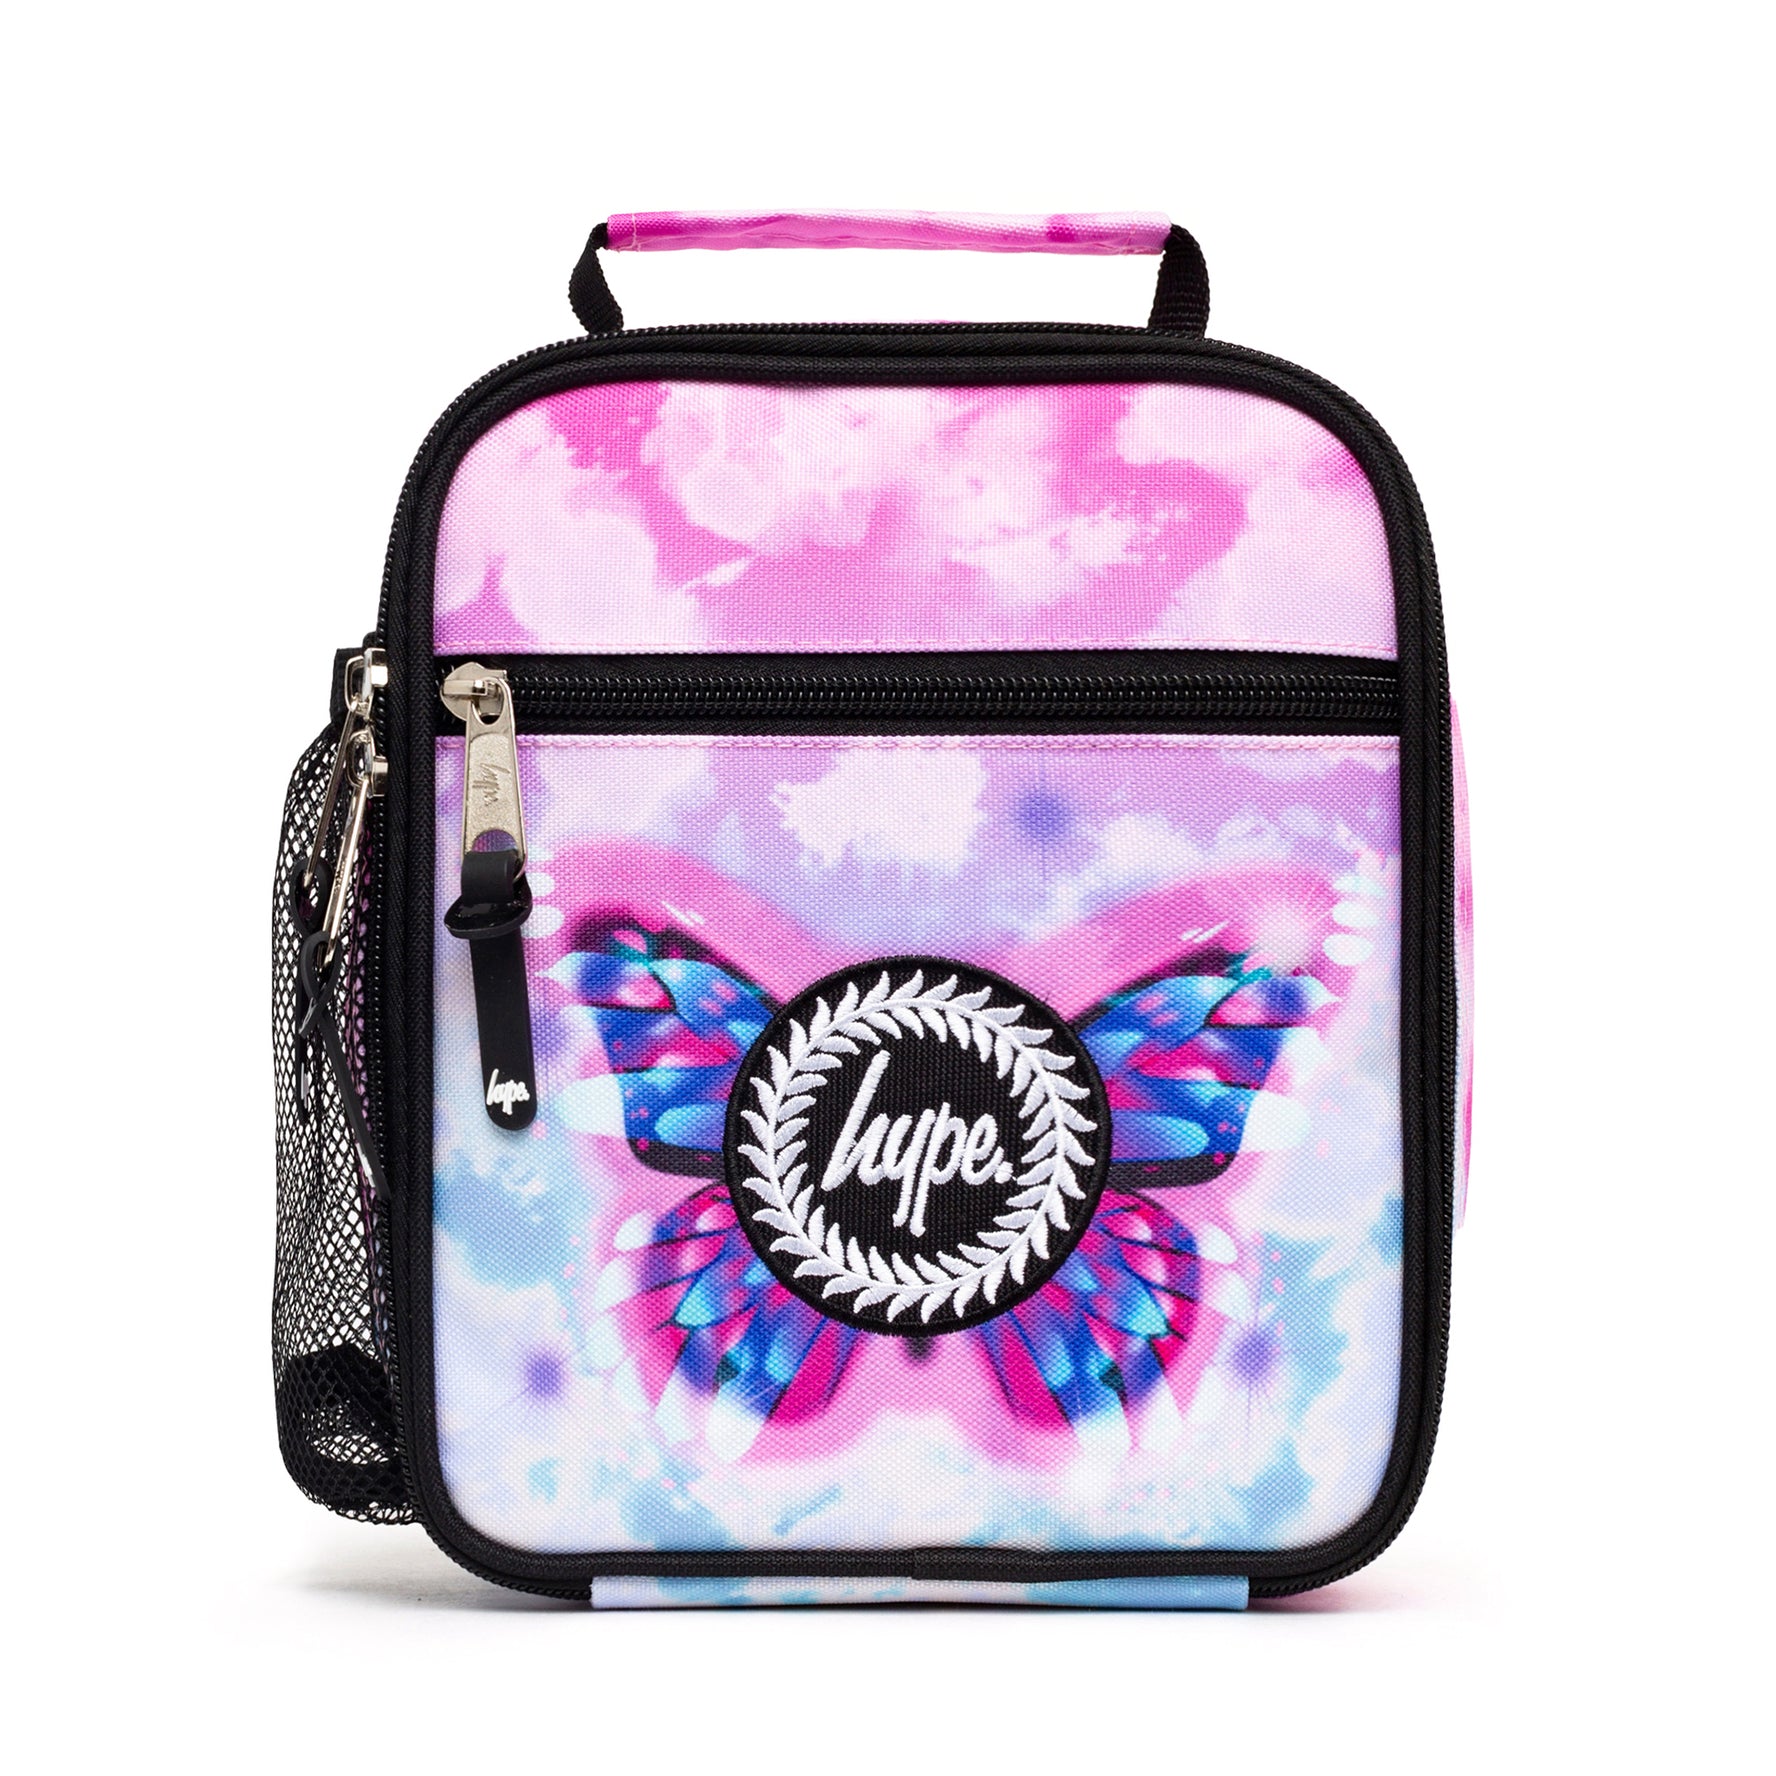 Gradient Skies Butterfly Lunch Box-Lunch Box-Hype-Gradient Skies Butterfly-SchoolBagsAndStuff